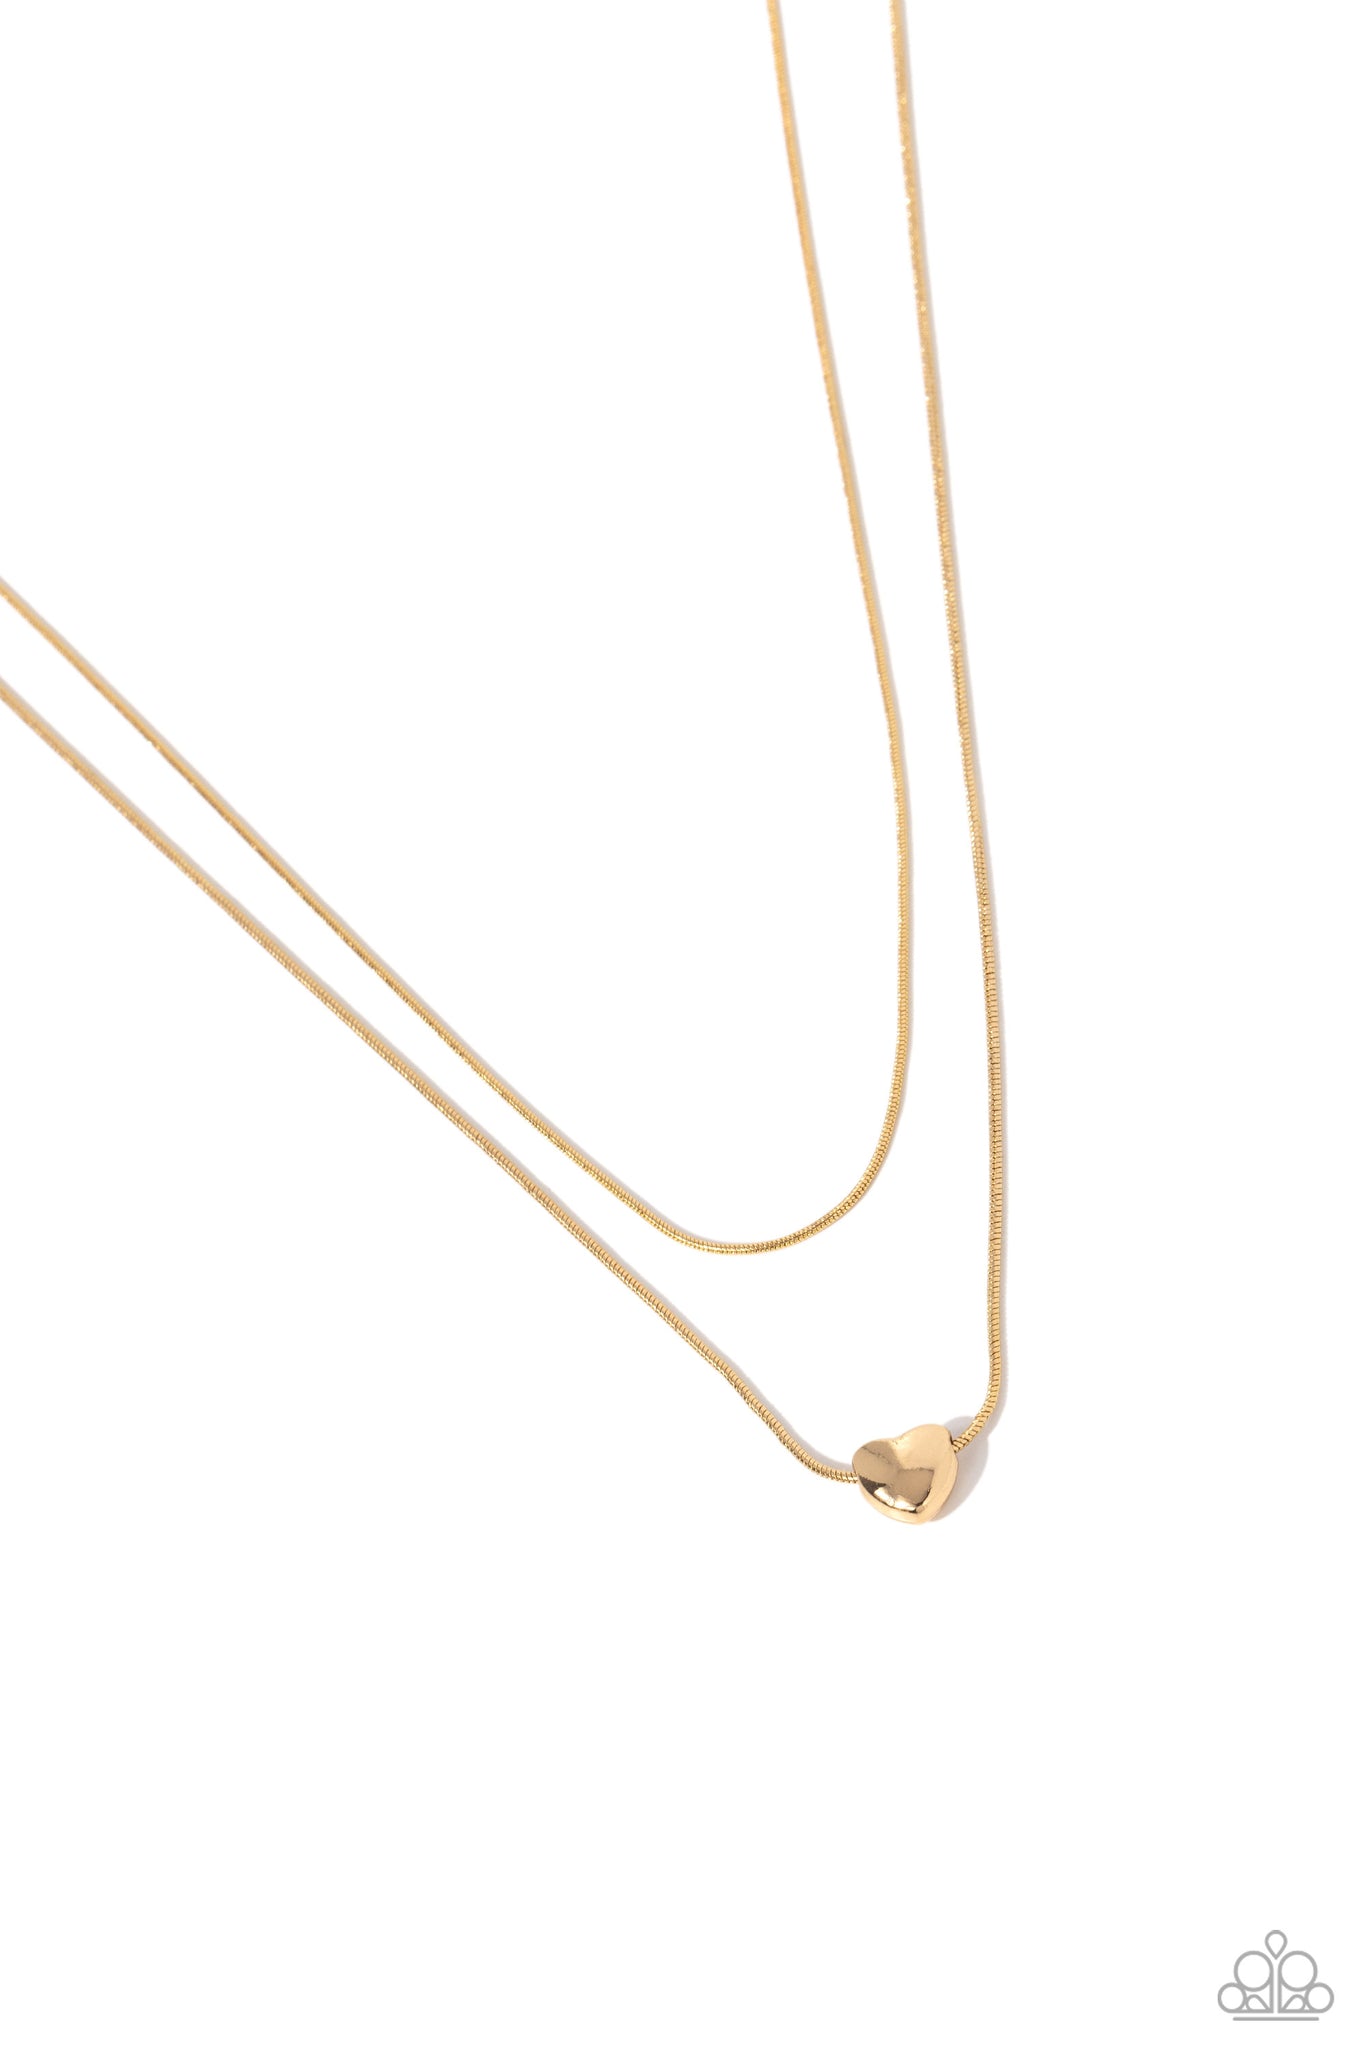 Sweetheart Series Necklace (Gold, Copper, Silver)